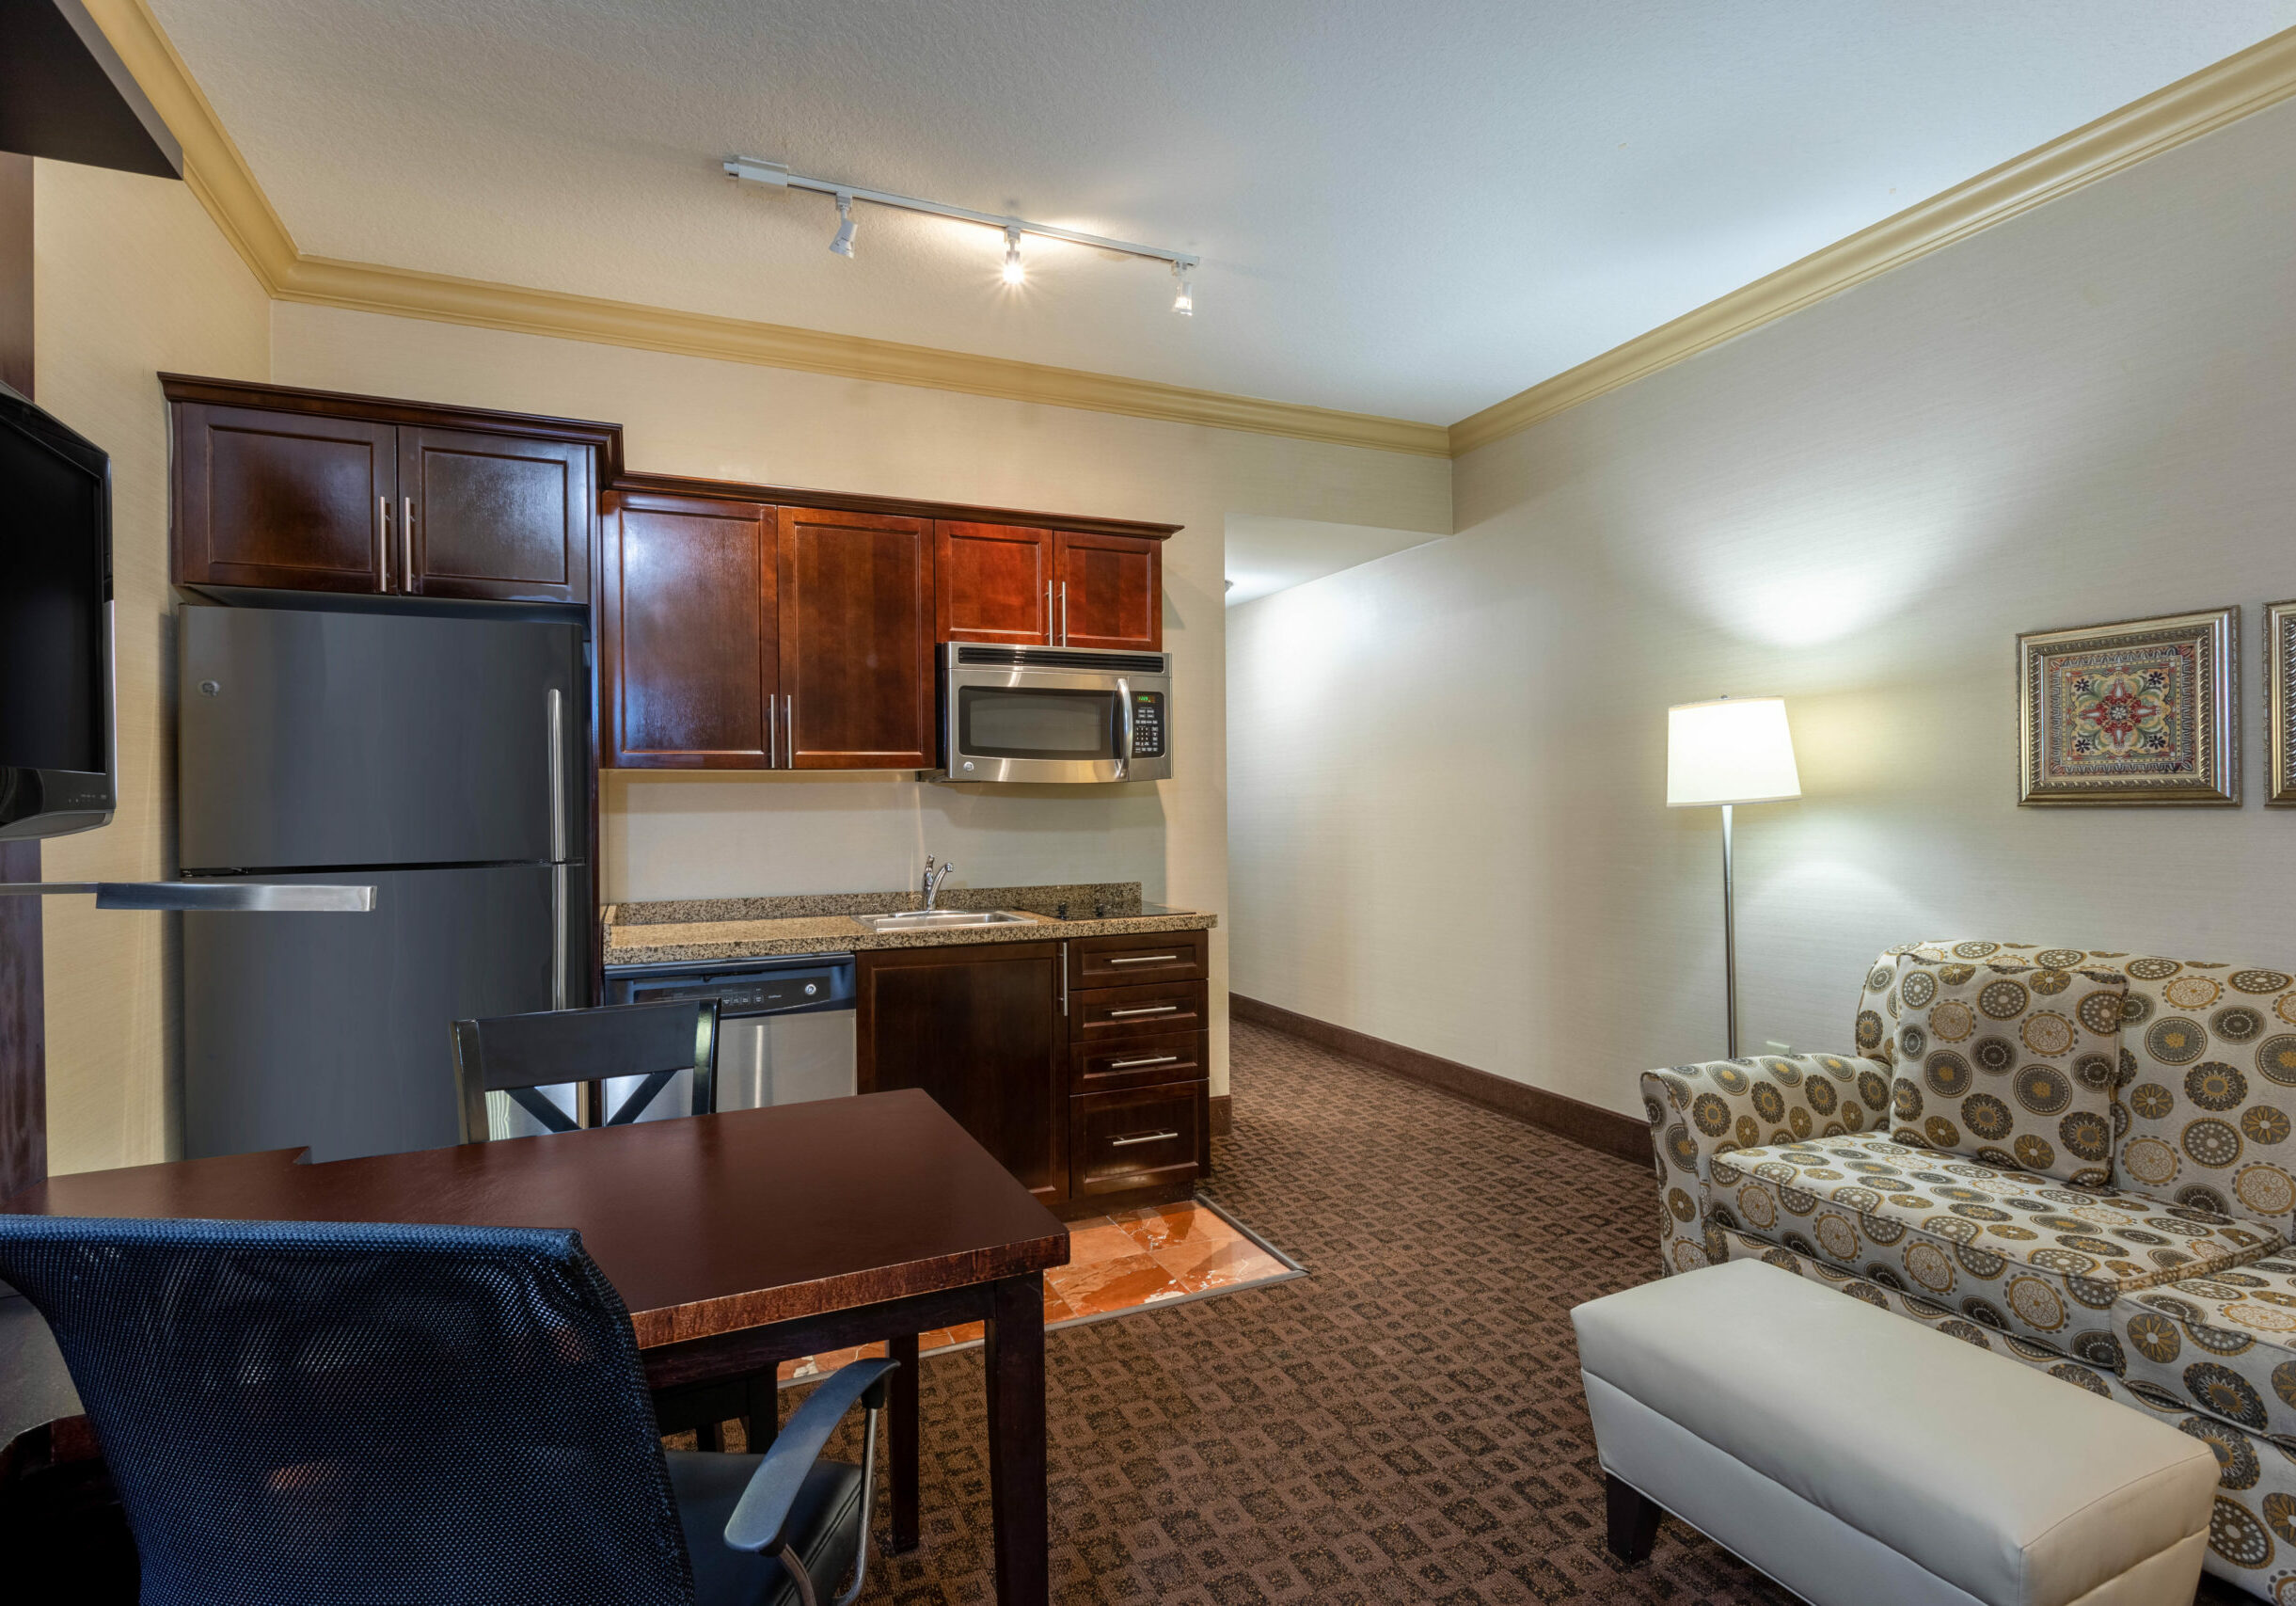 2 Queen Bedroom Requested at Hawthorn Suites By Wyndham West Palm Beach